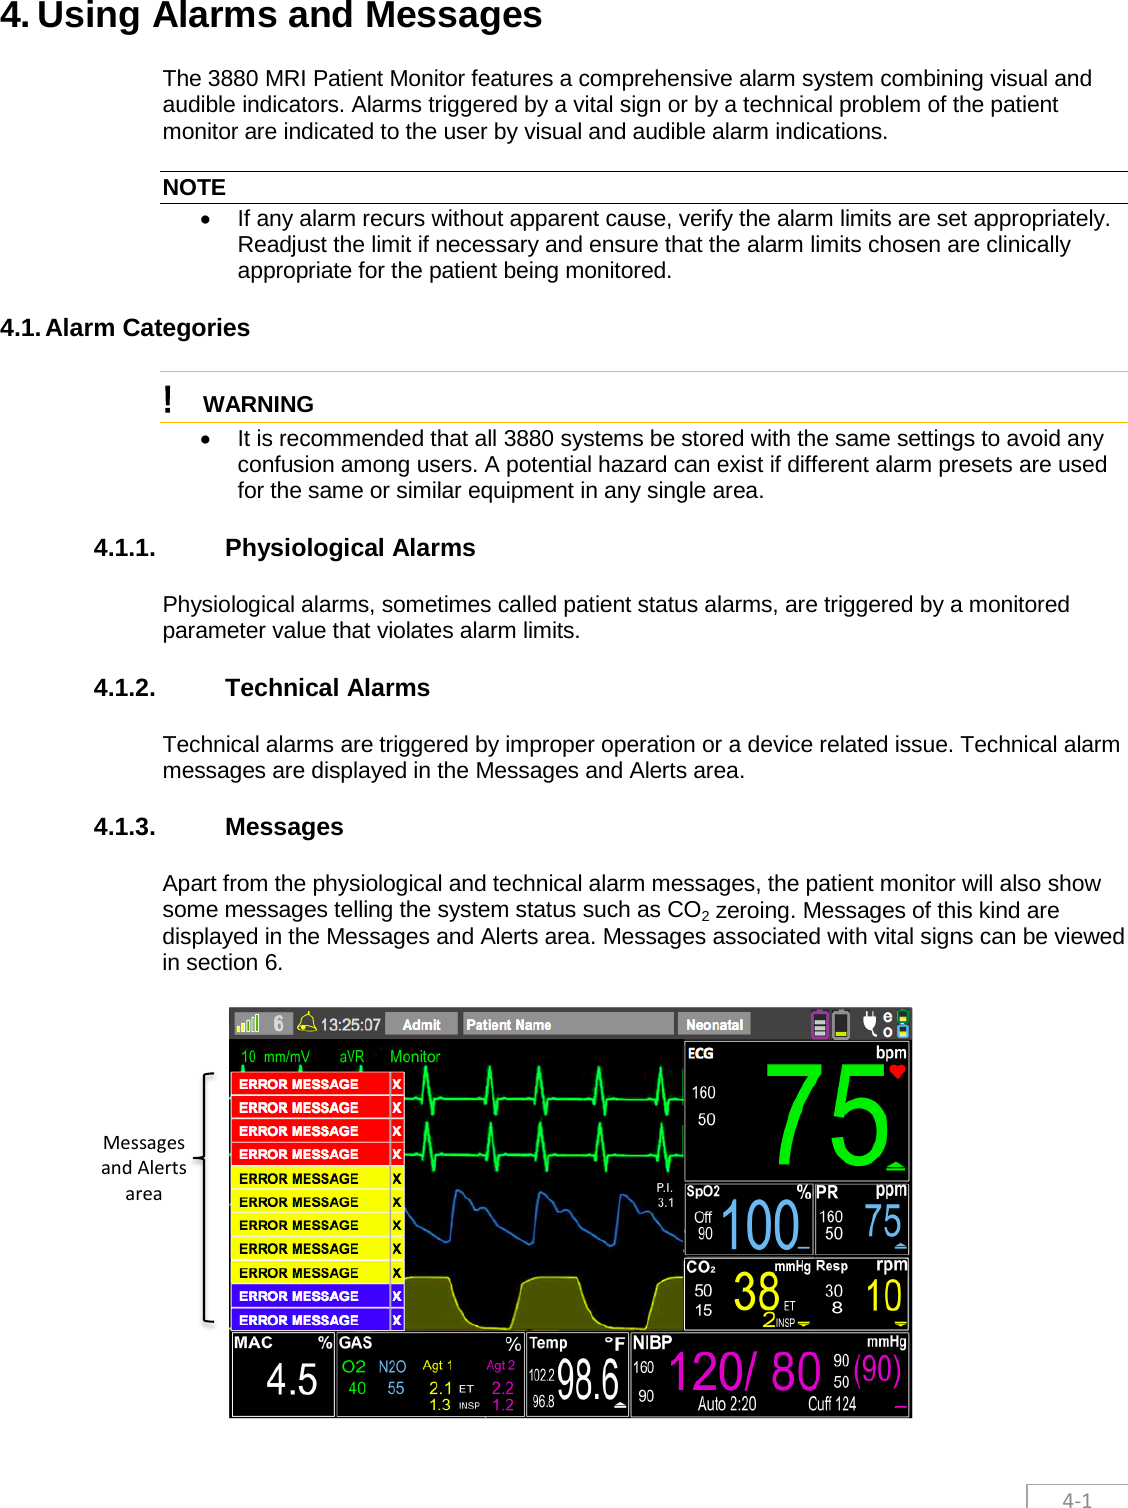  4-1 4. Using Alarms and Messages The 3880 MRI Patient Monitor features a comprehensive alarm system combining visual and audible indicators. Alarms triggered by a vital sign or by a technical problem of the patient monitor are indicated to the user by visual and audible alarm indications.  NOTE • If any alarm recurs without apparent cause, verify the alarm limits are set appropriately. Readjust the limit if necessary and ensure that the alarm limits chosen are clinically appropriate for the patient being monitored. 4.1. Alarm Categories ! WARNING  • It is recommended that all 3880 systems be stored with the same settings to avoid any confusion among users. A potential hazard can exist if different alarm presets are used for the same or similar equipment in any single area.  4.1.1. Physiological Alarms Physiological alarms, sometimes called patient status alarms, are triggered by a monitored parameter value that violates alarm limits.   4.1.2. Technical Alarms Technical alarms are triggered by improper operation or a device related issue. Technical alarm messages are displayed in the Messages and Alerts area. 4.1.3. Messages Apart from the physiological and technical alarm messages, the patient monitor will also show some messages telling the system status such as CO2 zeroing. Messages of this kind are displayed in the Messages and Alerts area. Messages associated with vital signs can be viewed in section 6.    Messages and Alerts area 